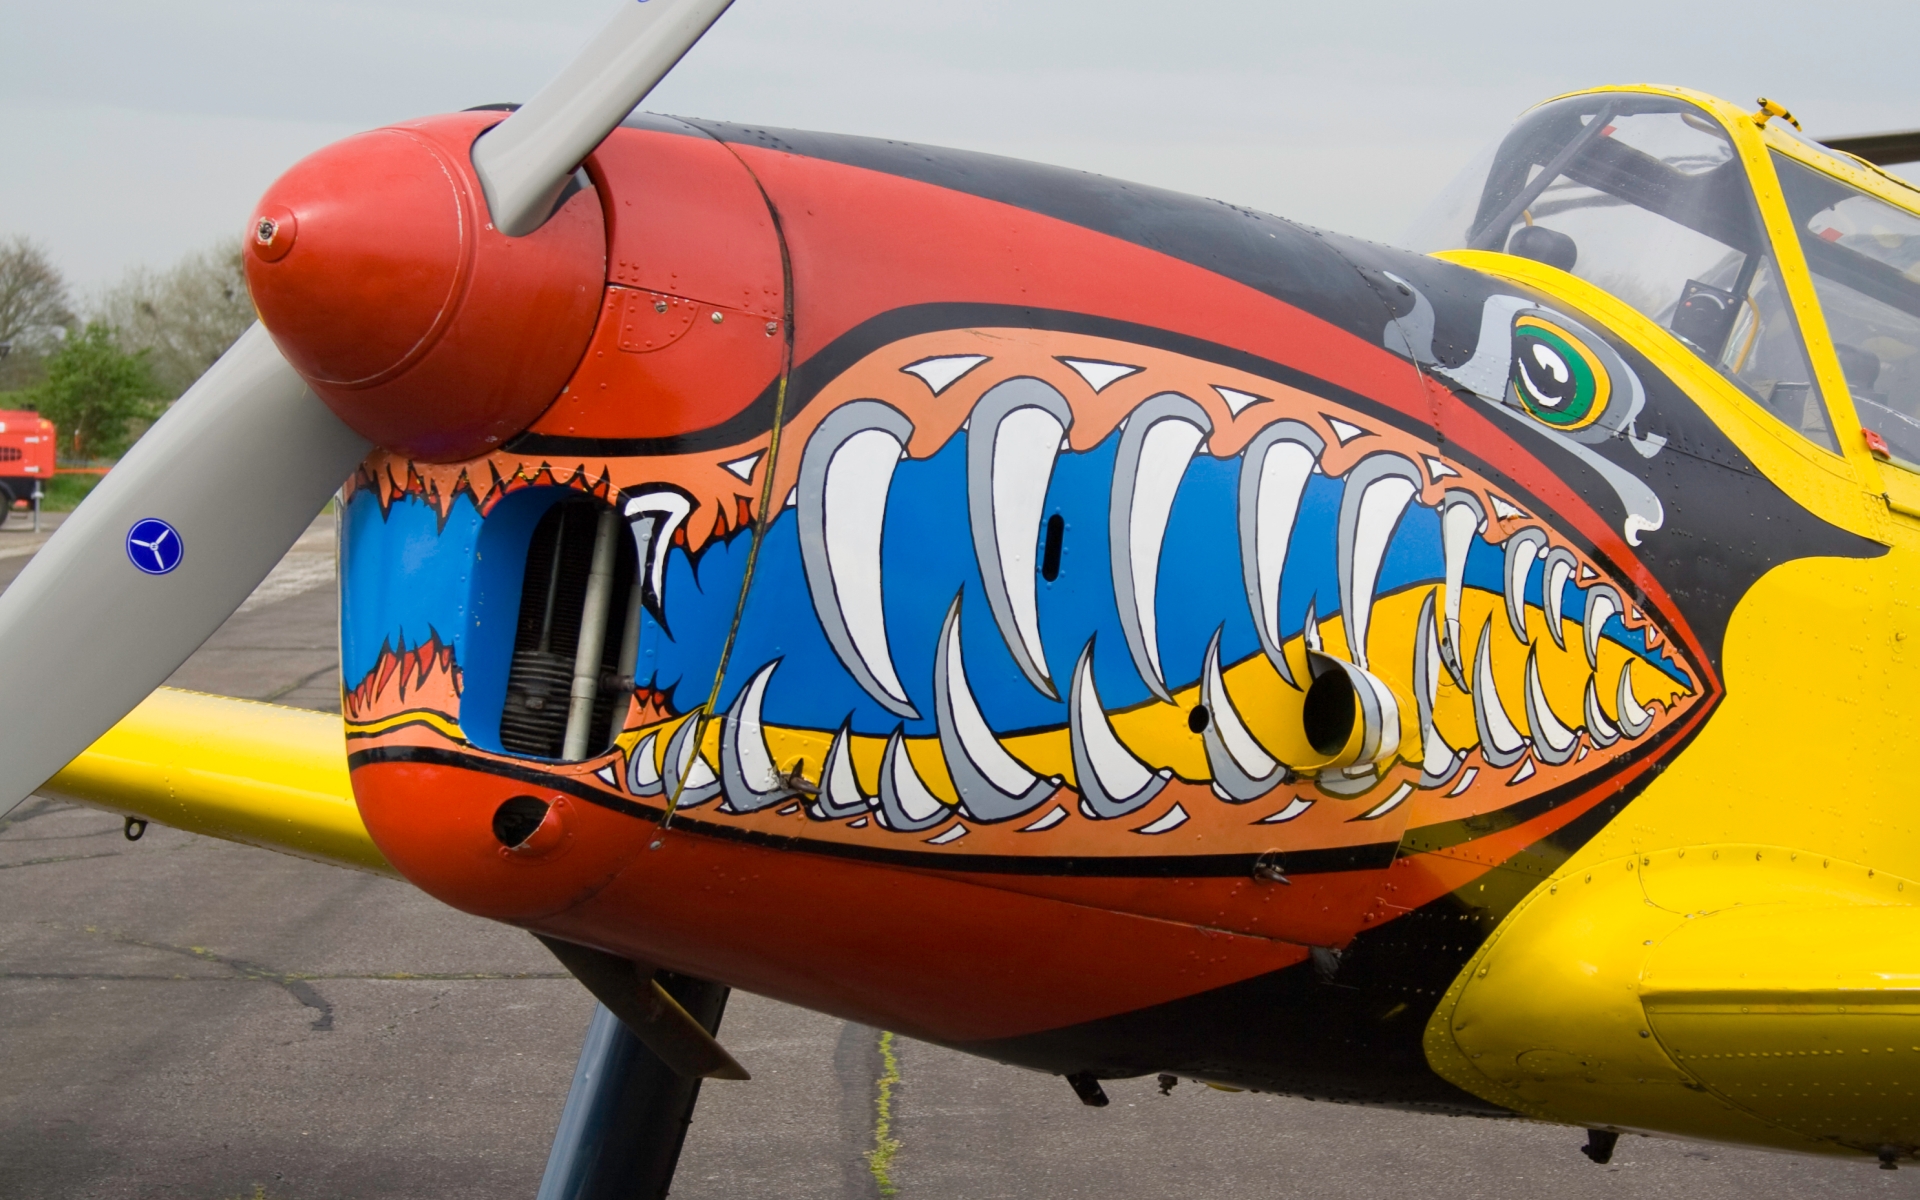 Aircraft Nose Art Full HD Wallpaper and Background Image | 1920x1200 | ID:554086